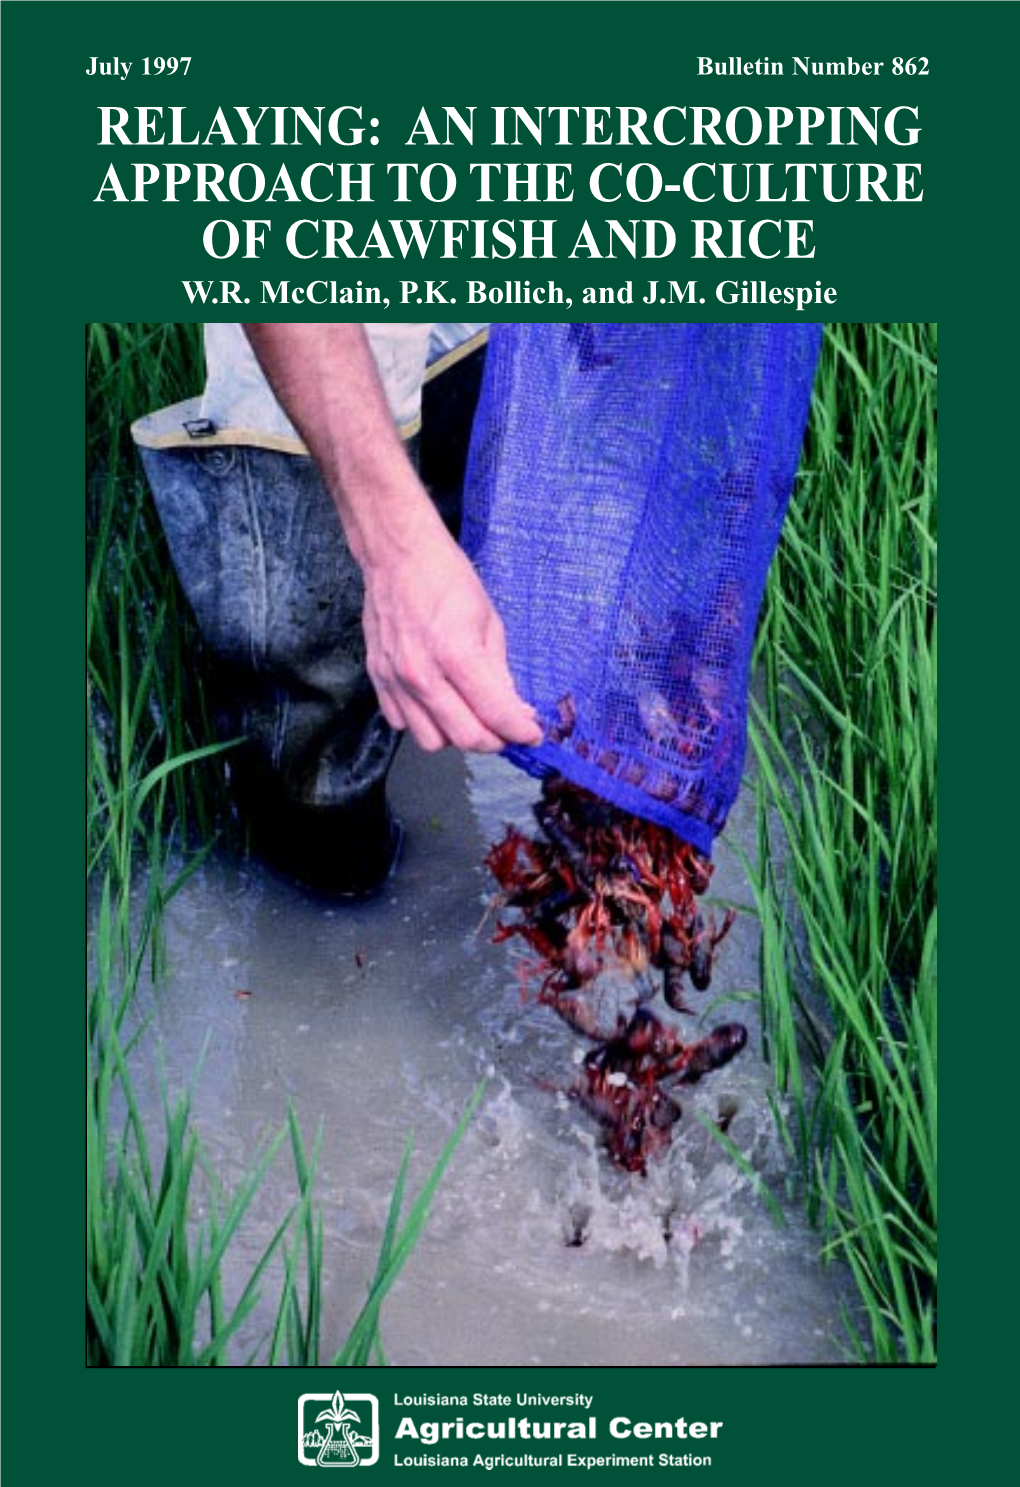 Relaying: an Intercropping Approach to the Co-Culture of Crawfish and Rice W.R